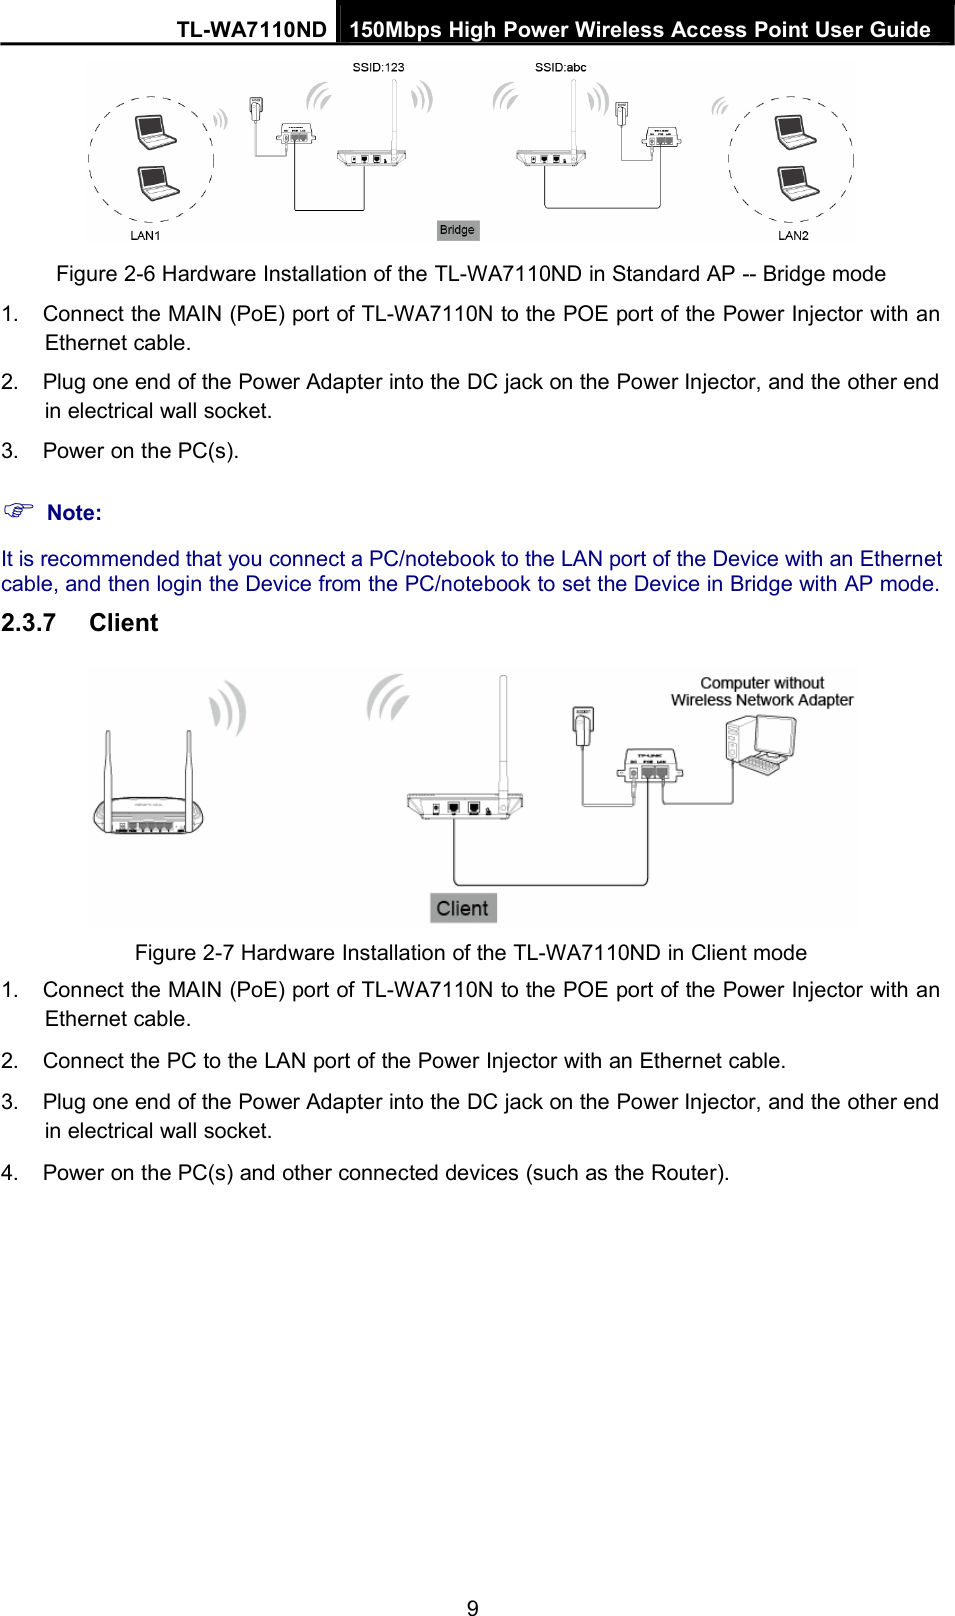 TL-WA7110ND 150Mbps High Power Wireless Access Point User GuideFigure 2-6 Hardware Installation of the TL-WA7110ND in Standard AP -- Bridge mode1. Connect the MAIN (PoE) port of TL-WA7110N to the POE port of the Power Injector with anEthernet cable.2. Plug one end of the Power Adapter into the DC jack on the Power Injector, and the other endin electrical wall socket.3. Power on the PC(s).Note:It is recommended that you connect a PC/notebook to the LAN port of the Device with an Ethernetcable, and then login the Device from the PC/notebook to set the Device in Bridge with AP mode.2.3.7 ClientFigure 2-7 Hardware Installation of the TL-WA7110ND in Client mode1. Connect the MAIN (PoE) port of TL-WA7110N to the POE port of the Power Injector with anEthernet cable.2. Connect the PC to the LAN port of the Power Injector with an Ethernet cable.3. Plug one end of the Power Adapter into the DC jack on the Power Injector, and the other endin electrical wall socket.4. Power on the PC(s) and other connected devices (such as the Router).9